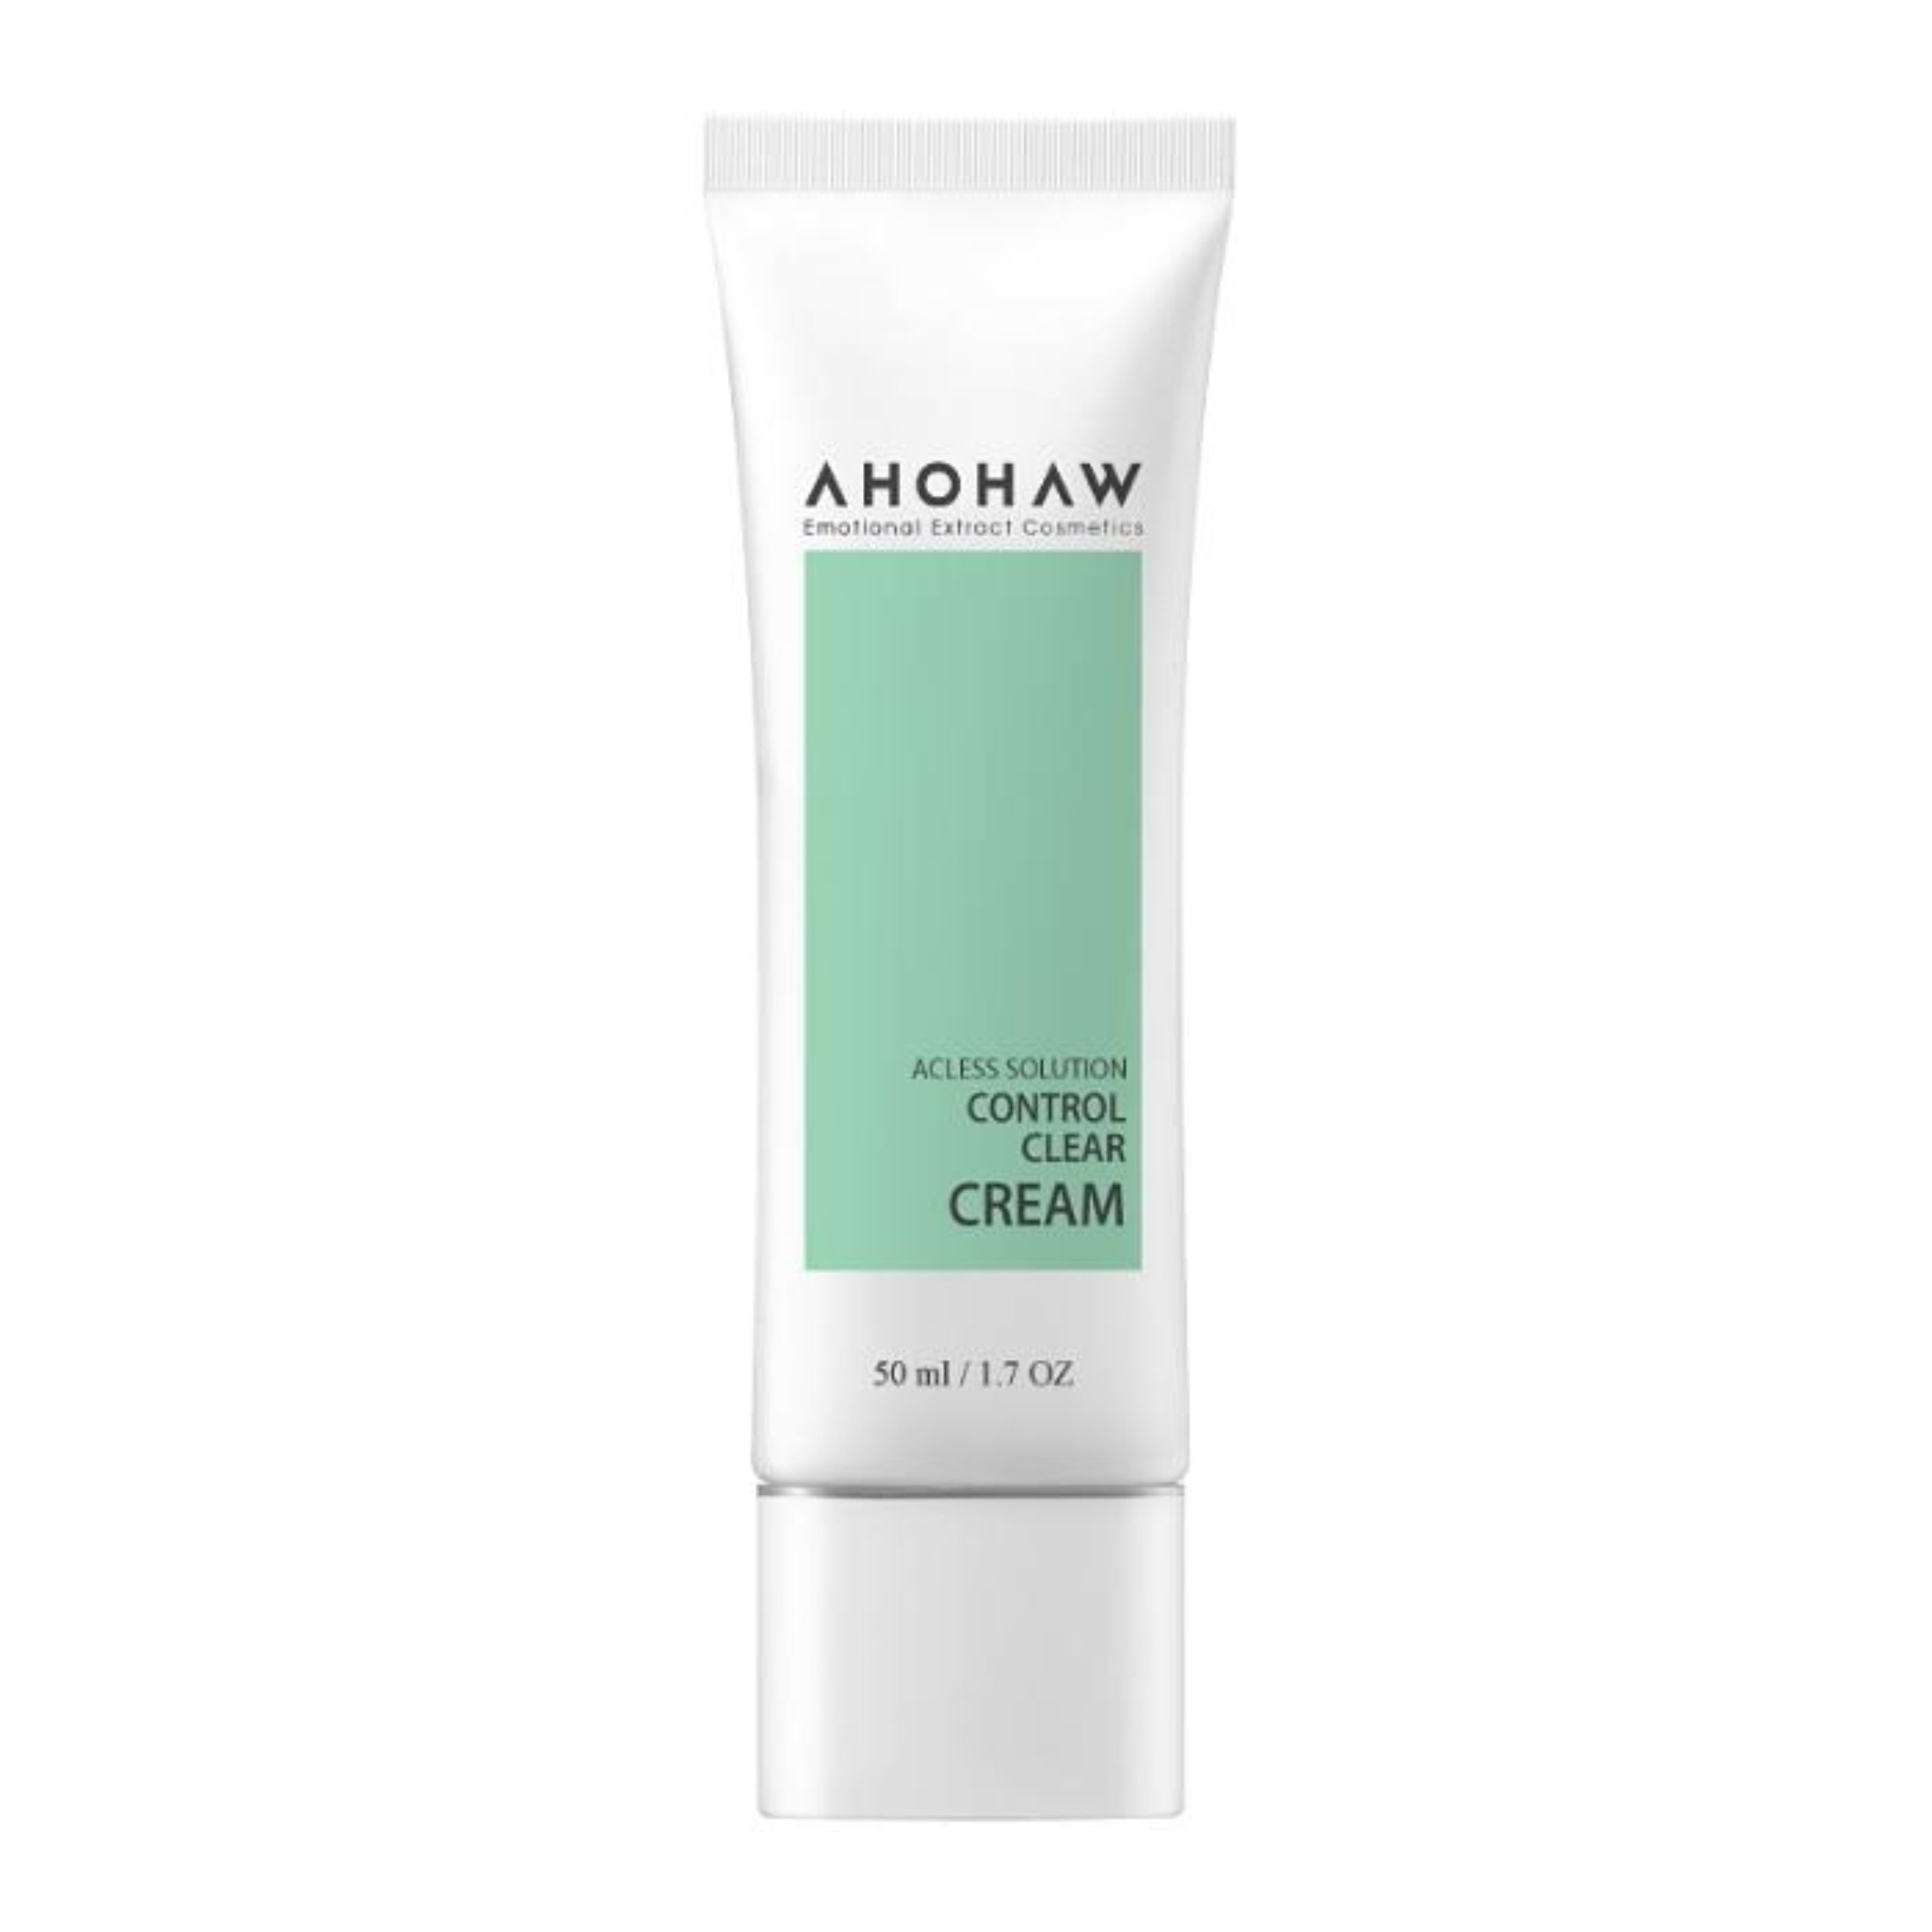 Control clearing Cream. AHOHAW. Clear control